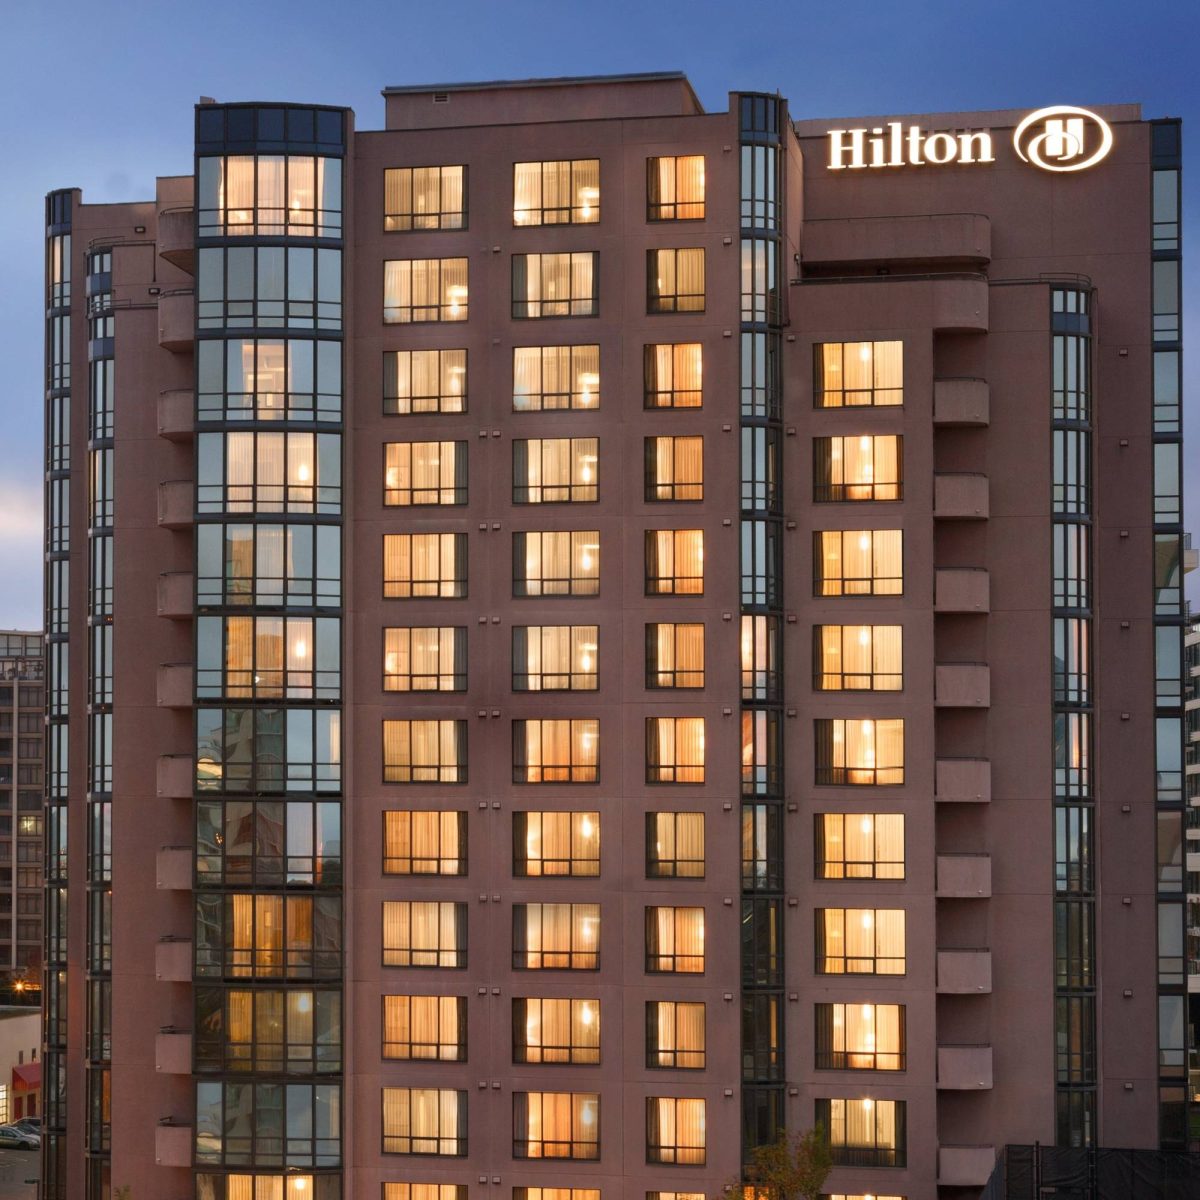 Hilton Vancouver Airport hotel building in Richmond, BC